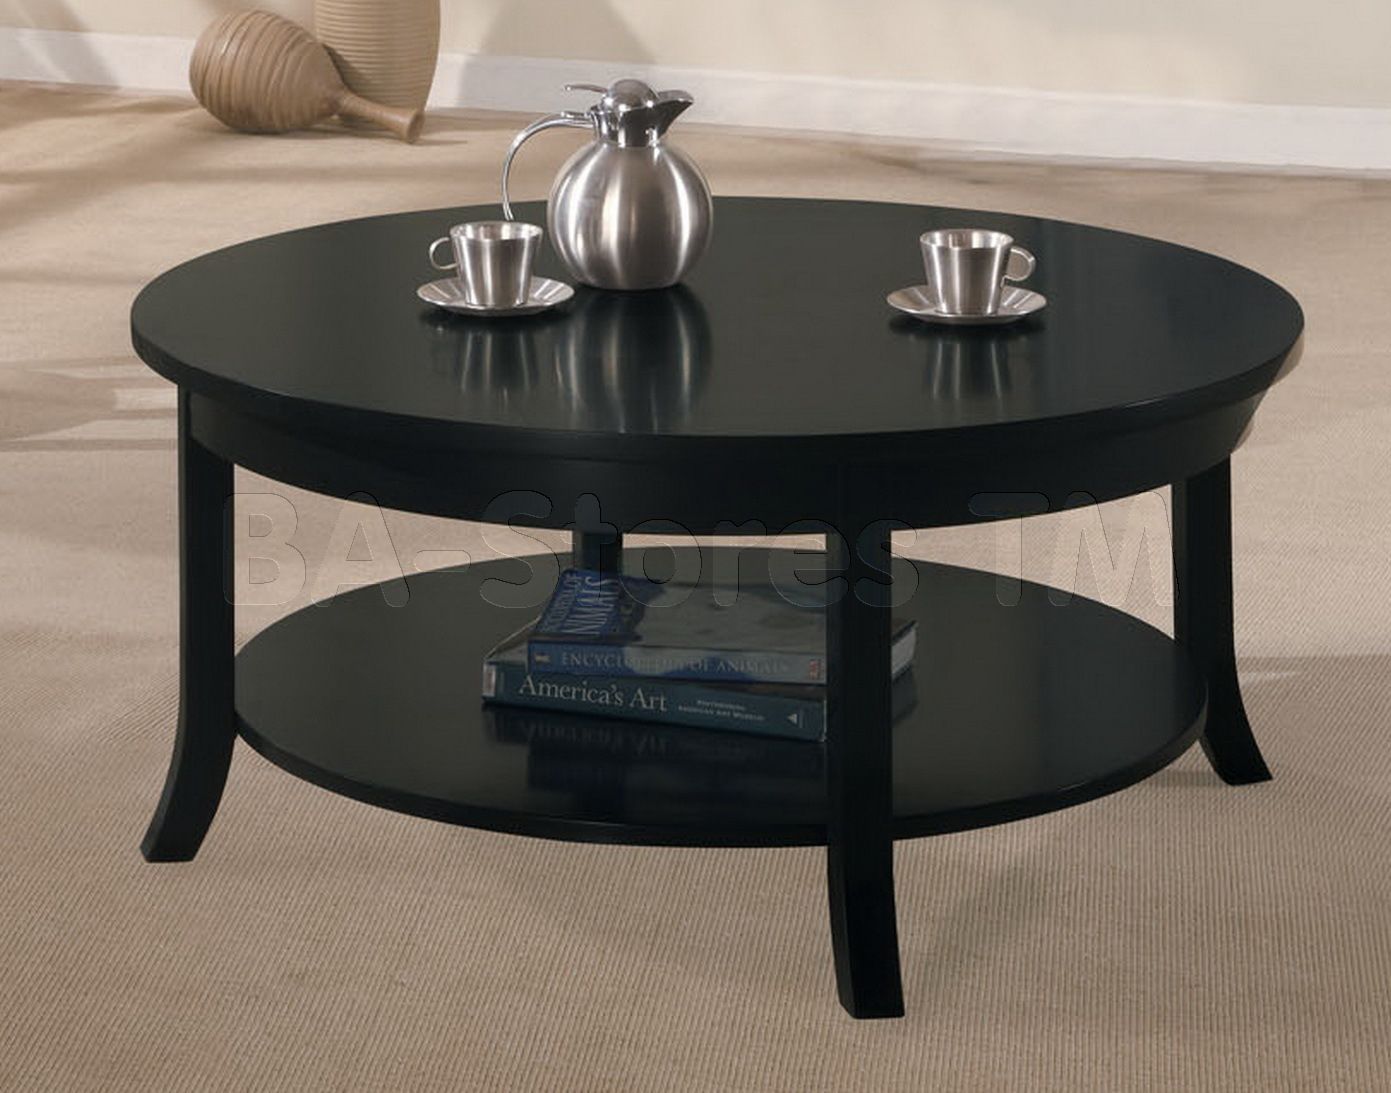 Bring A Touch Of Elegance To Your Home With A Black Circle Coffee Table Throughout Full Black Round Coffee Tables (View 6 of 15)